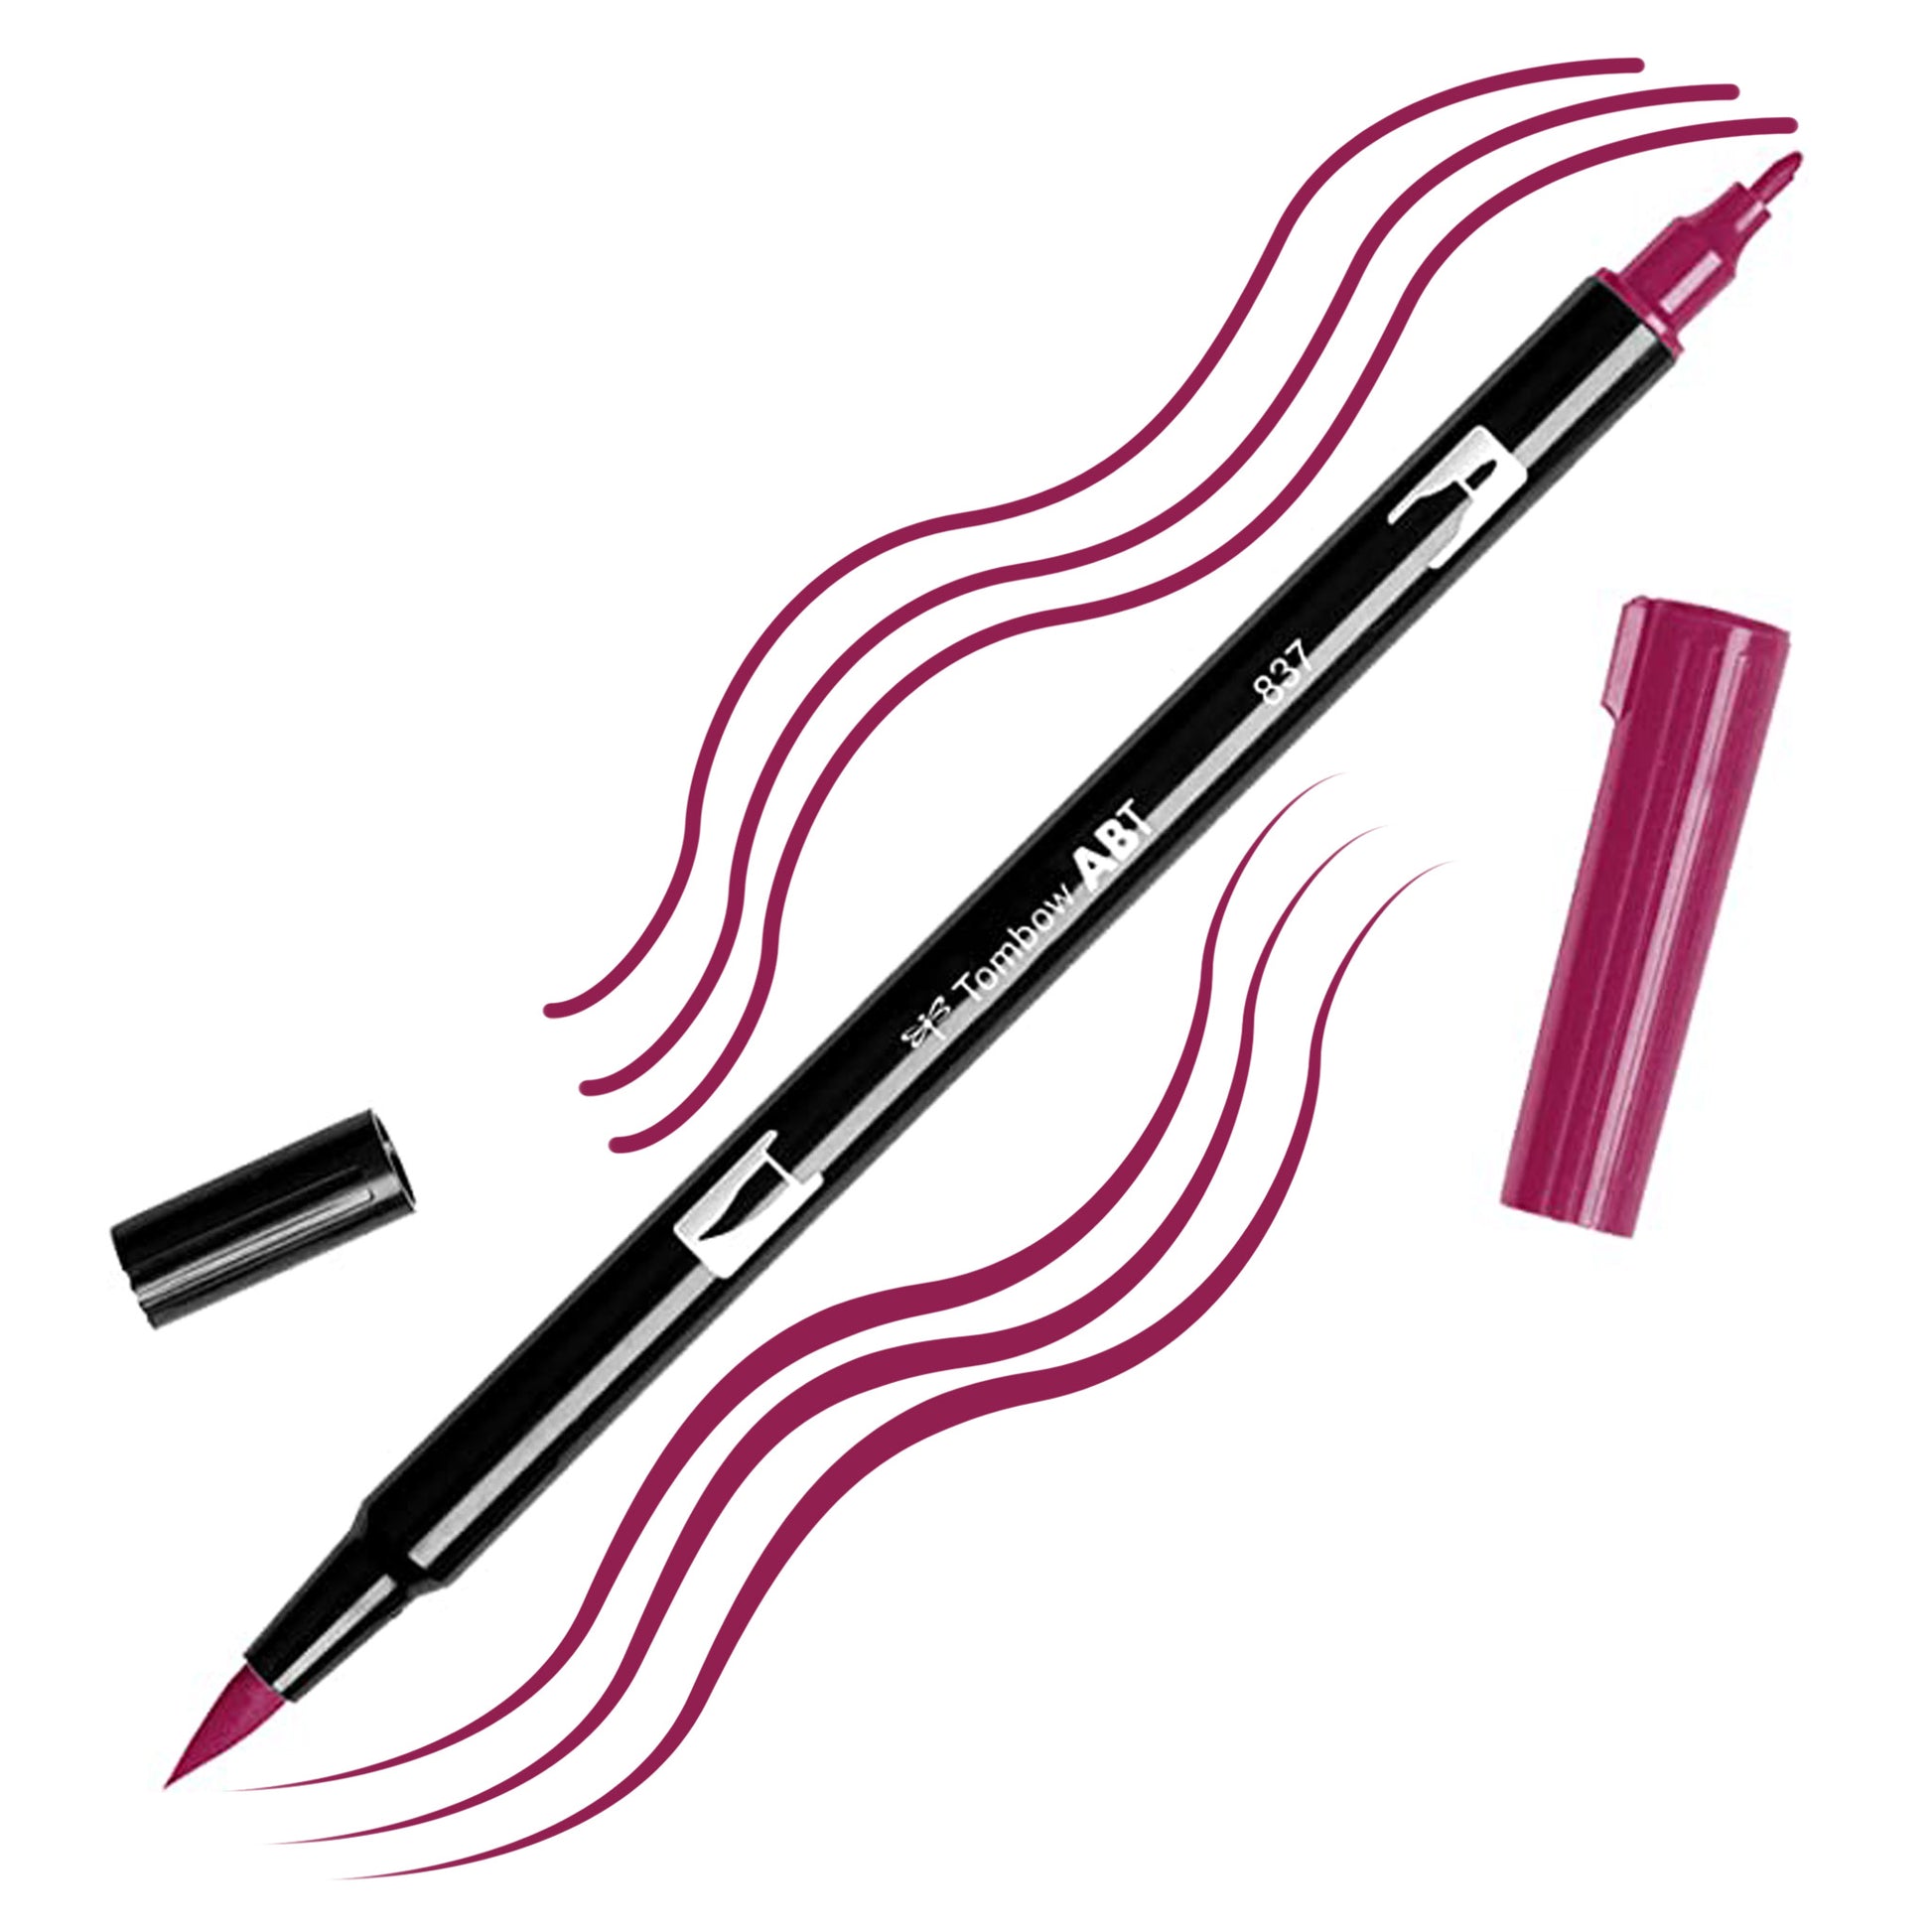 Wine red Tombow double-headed brush-pen with a flexible nylon fiber brush tip and a fine tip against a white background with wine red strokes